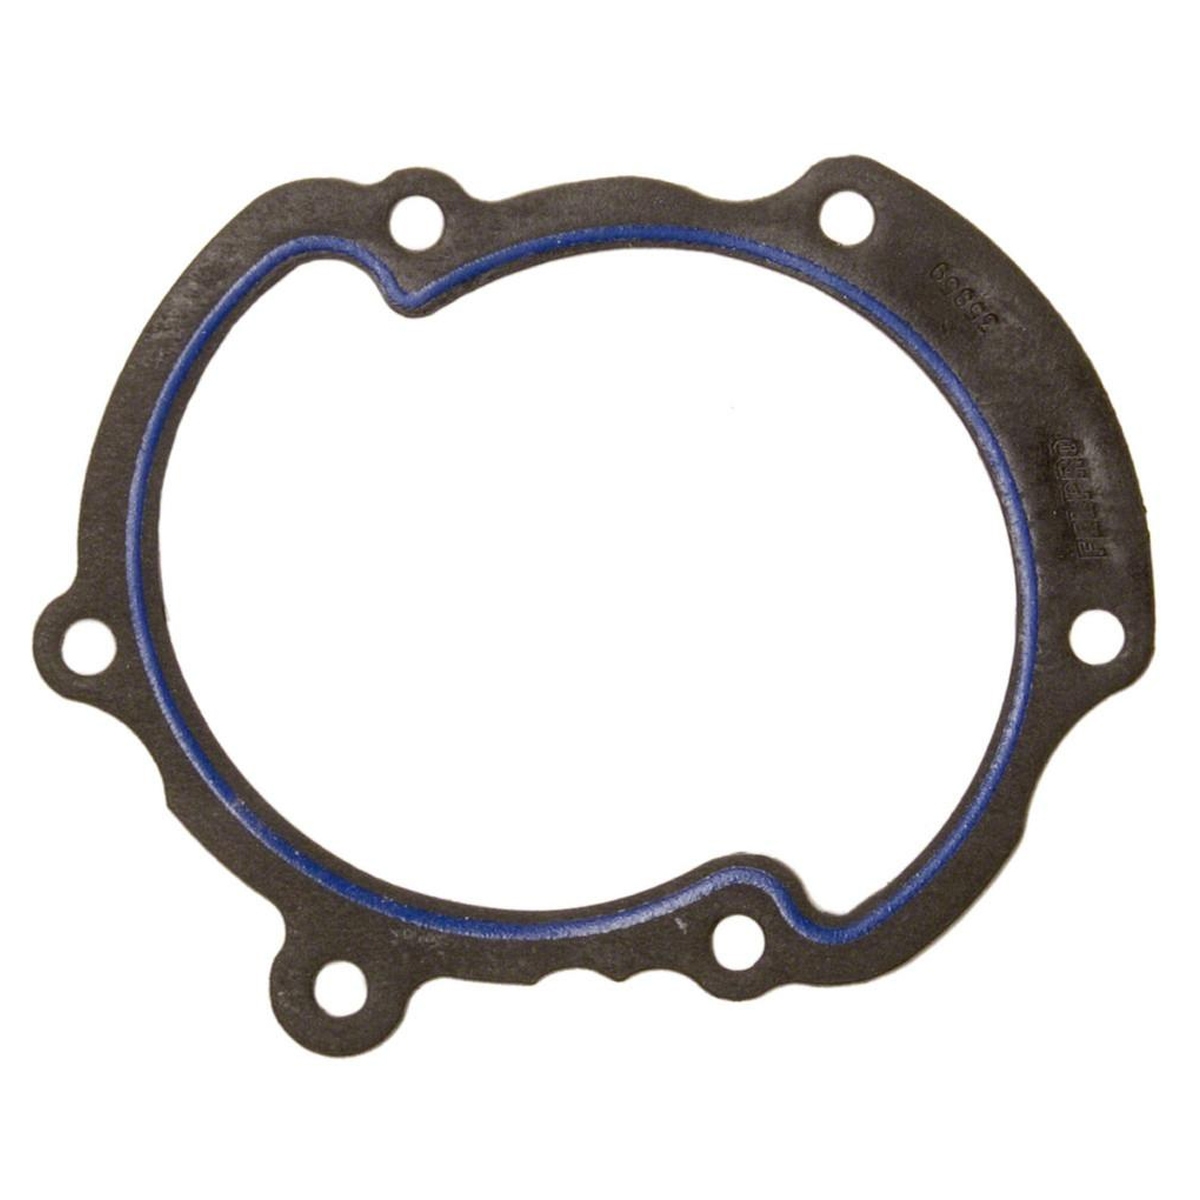 VAUXHALL AND OPEL RASCAL Water Pump Gasket